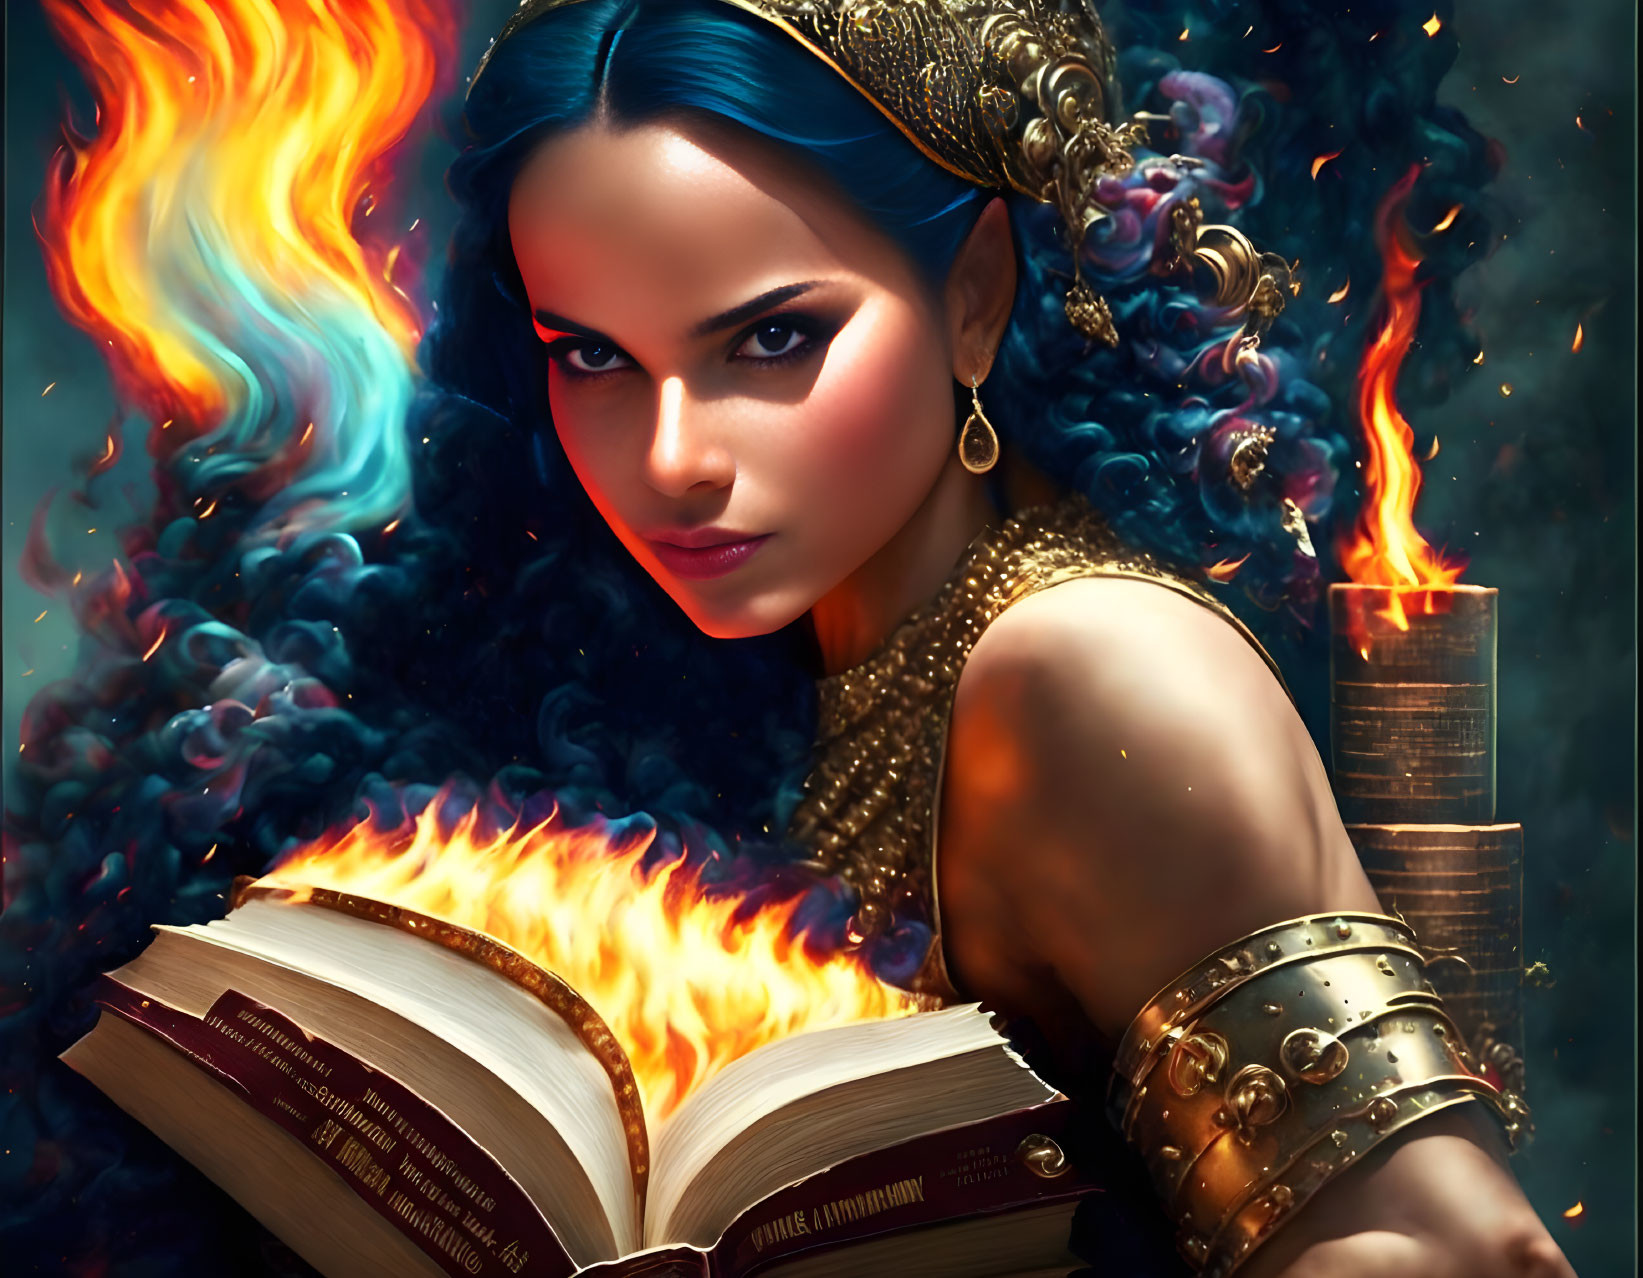 Woman adorned in ornate gold jewelry with fiery mane emerging from open book